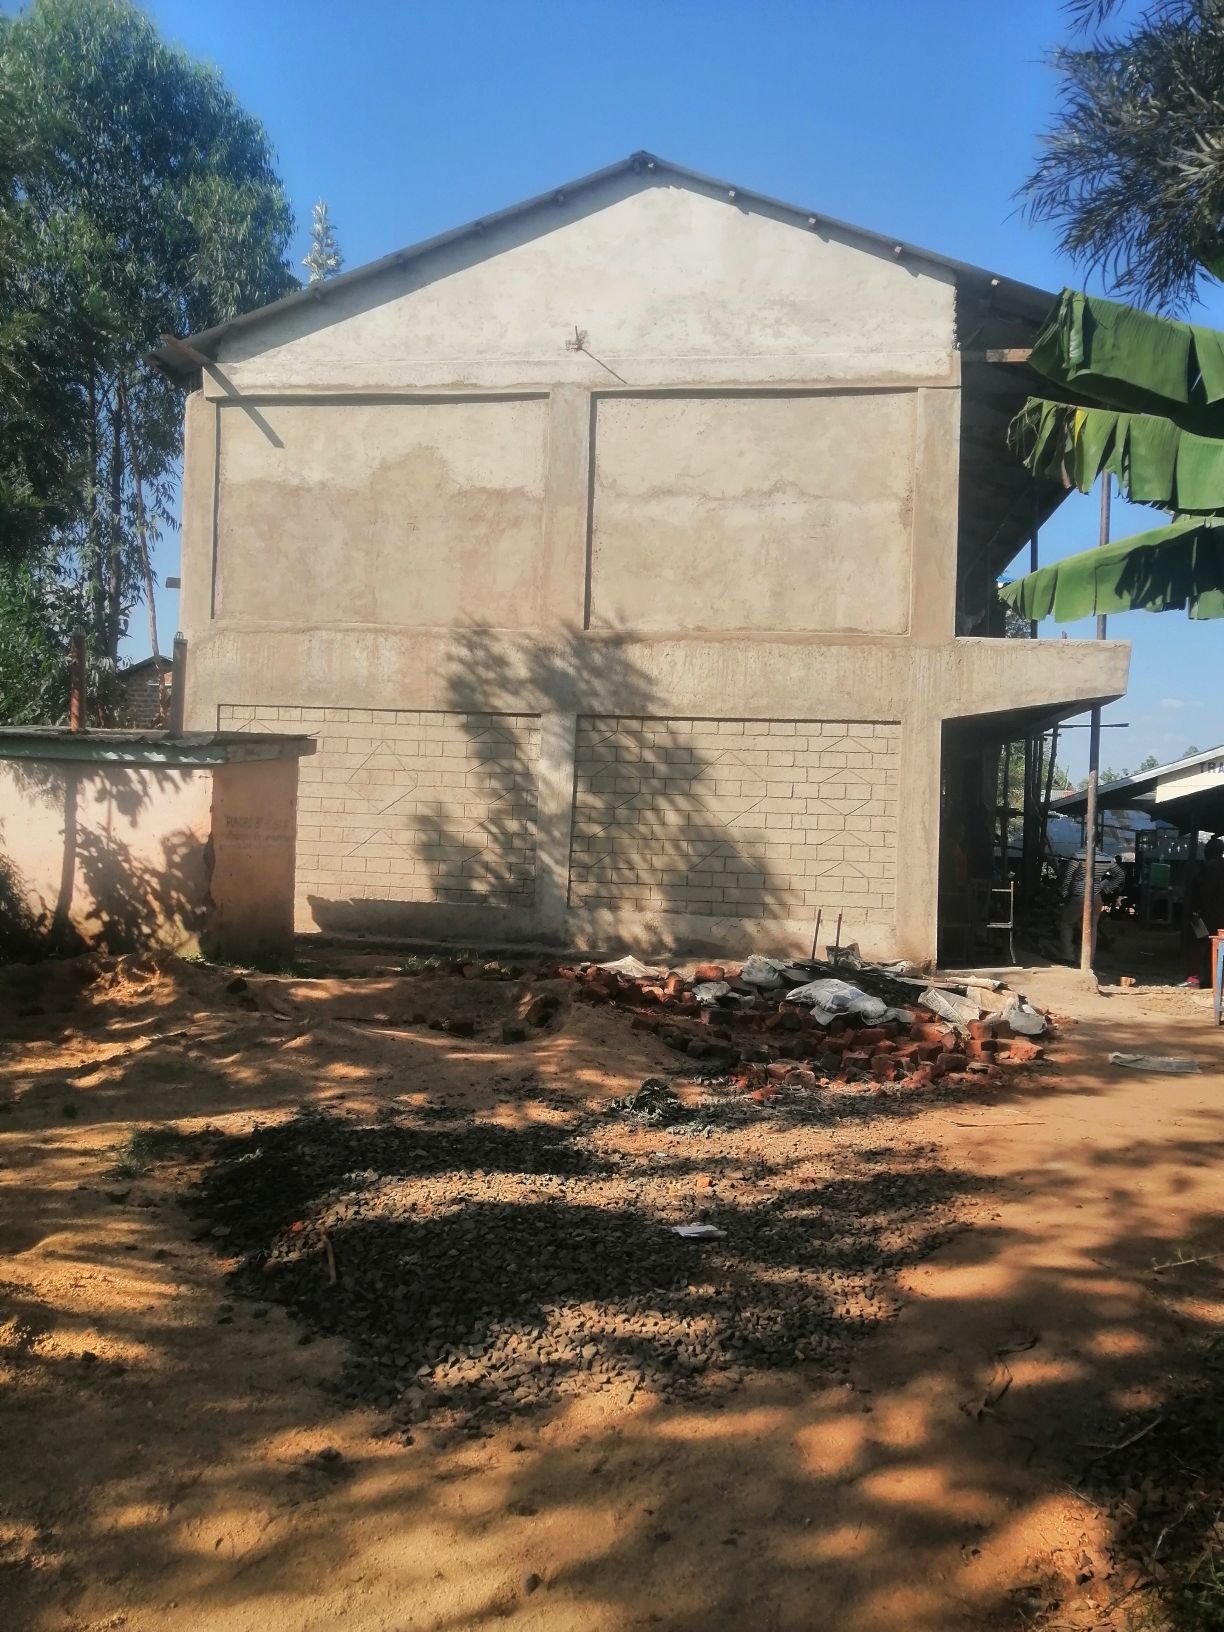 https://hamisi.ngcdf.go.ke/wp-content/uploads/2021/09/kitagwa-sec-sch-Construction-of-1-storey-building-housing-2No.-Classrooms-and-an-administration-office.jpg